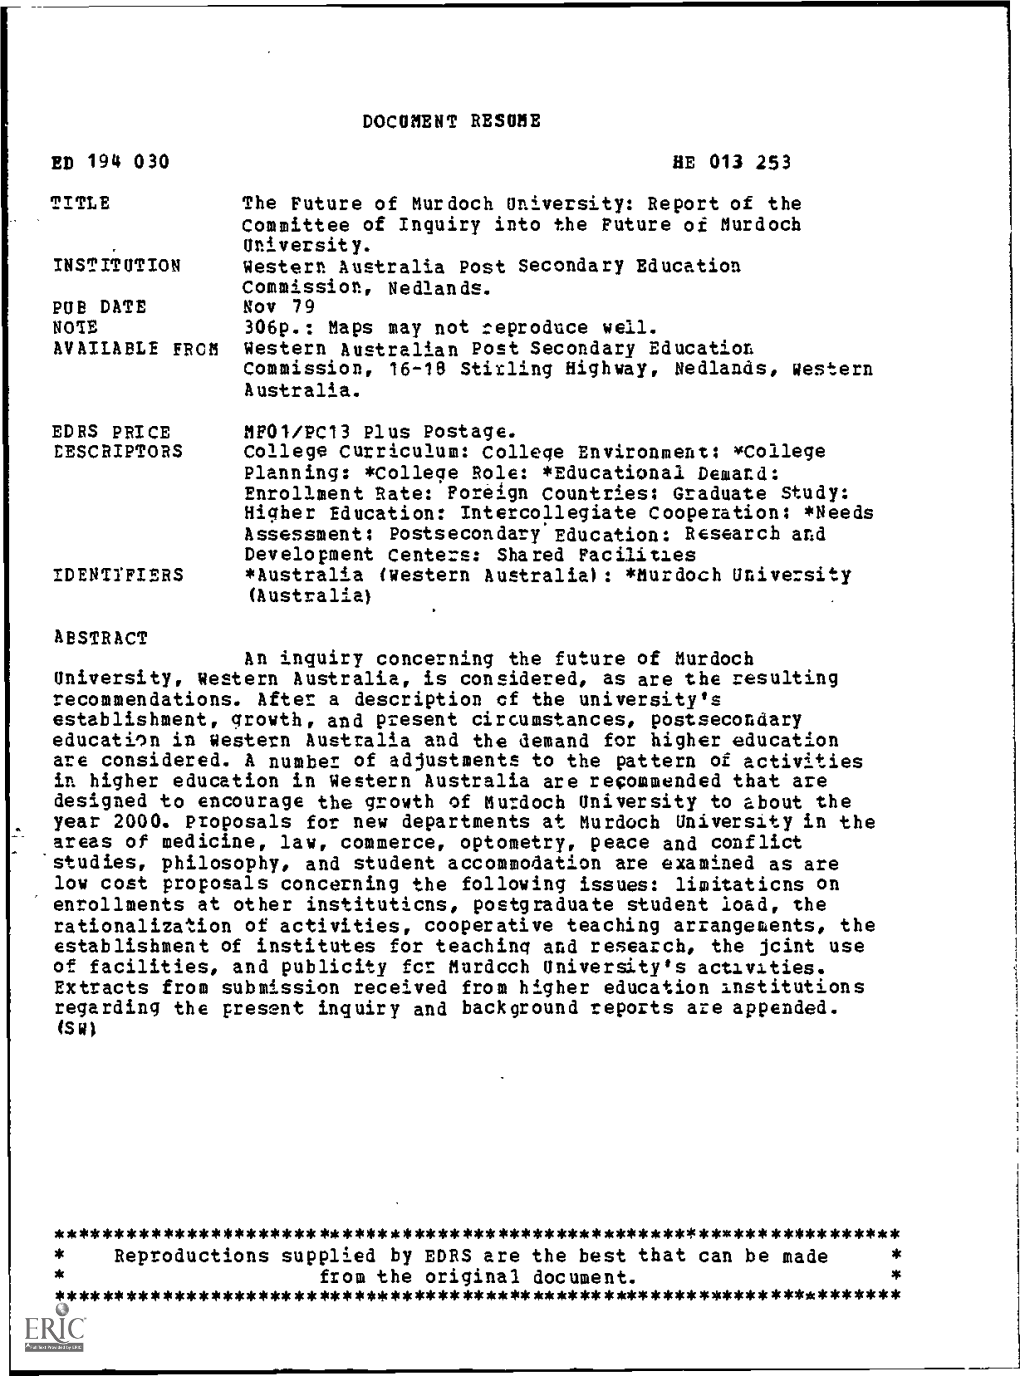 Report of the Committee of Inquiry Into the Future of Murdoch Nov 79